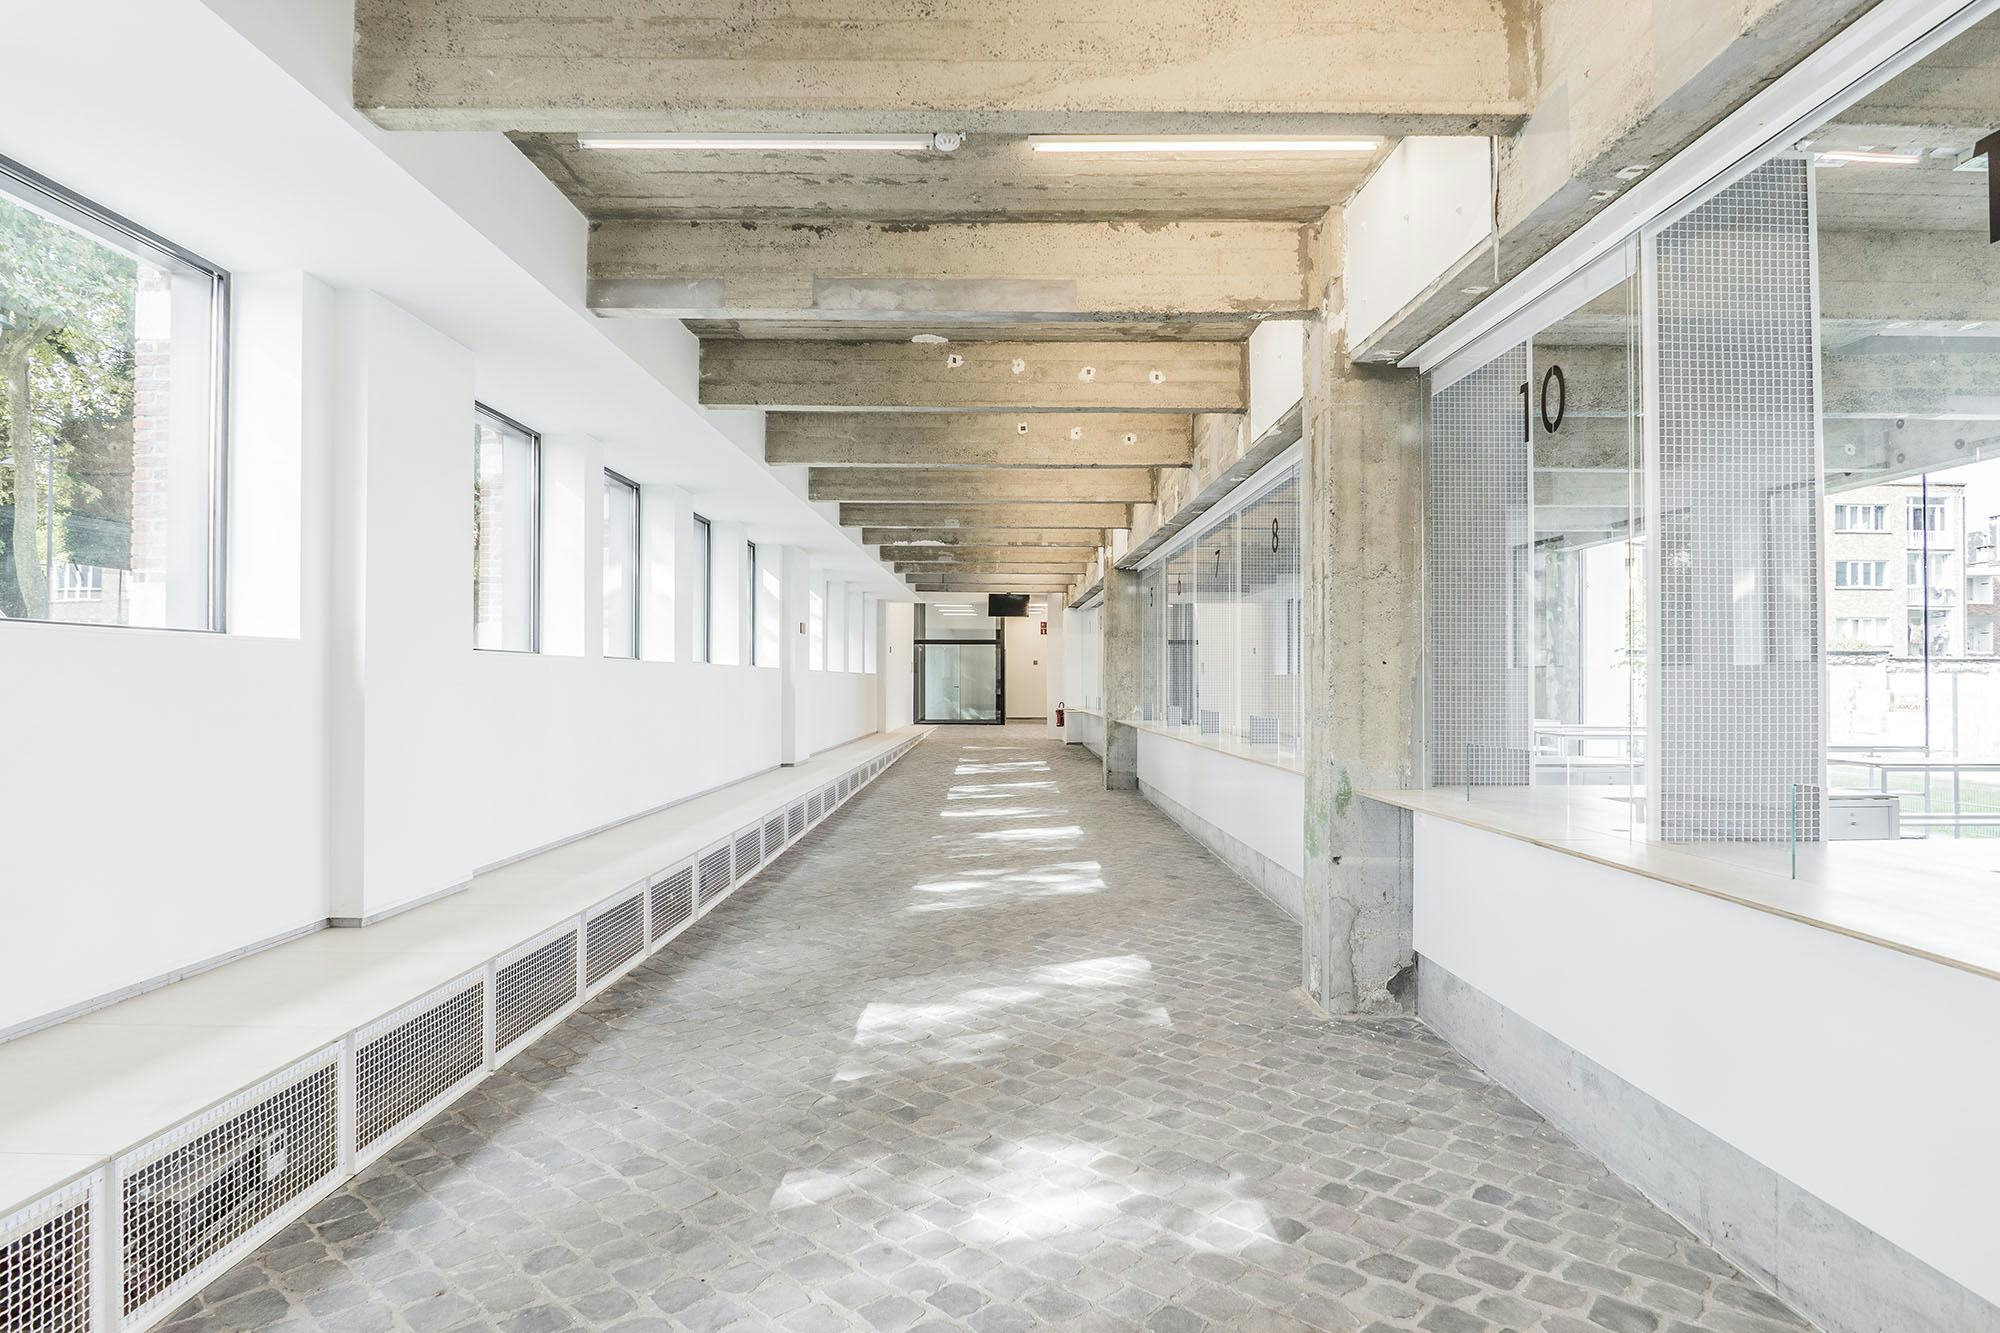 Building of the Year Awards, winnaar Rookie of the Year:  MAMOUT architectes. Foto: Project Charles Malis in Molenbeek. Beeld: Studio Fifty/Fifty